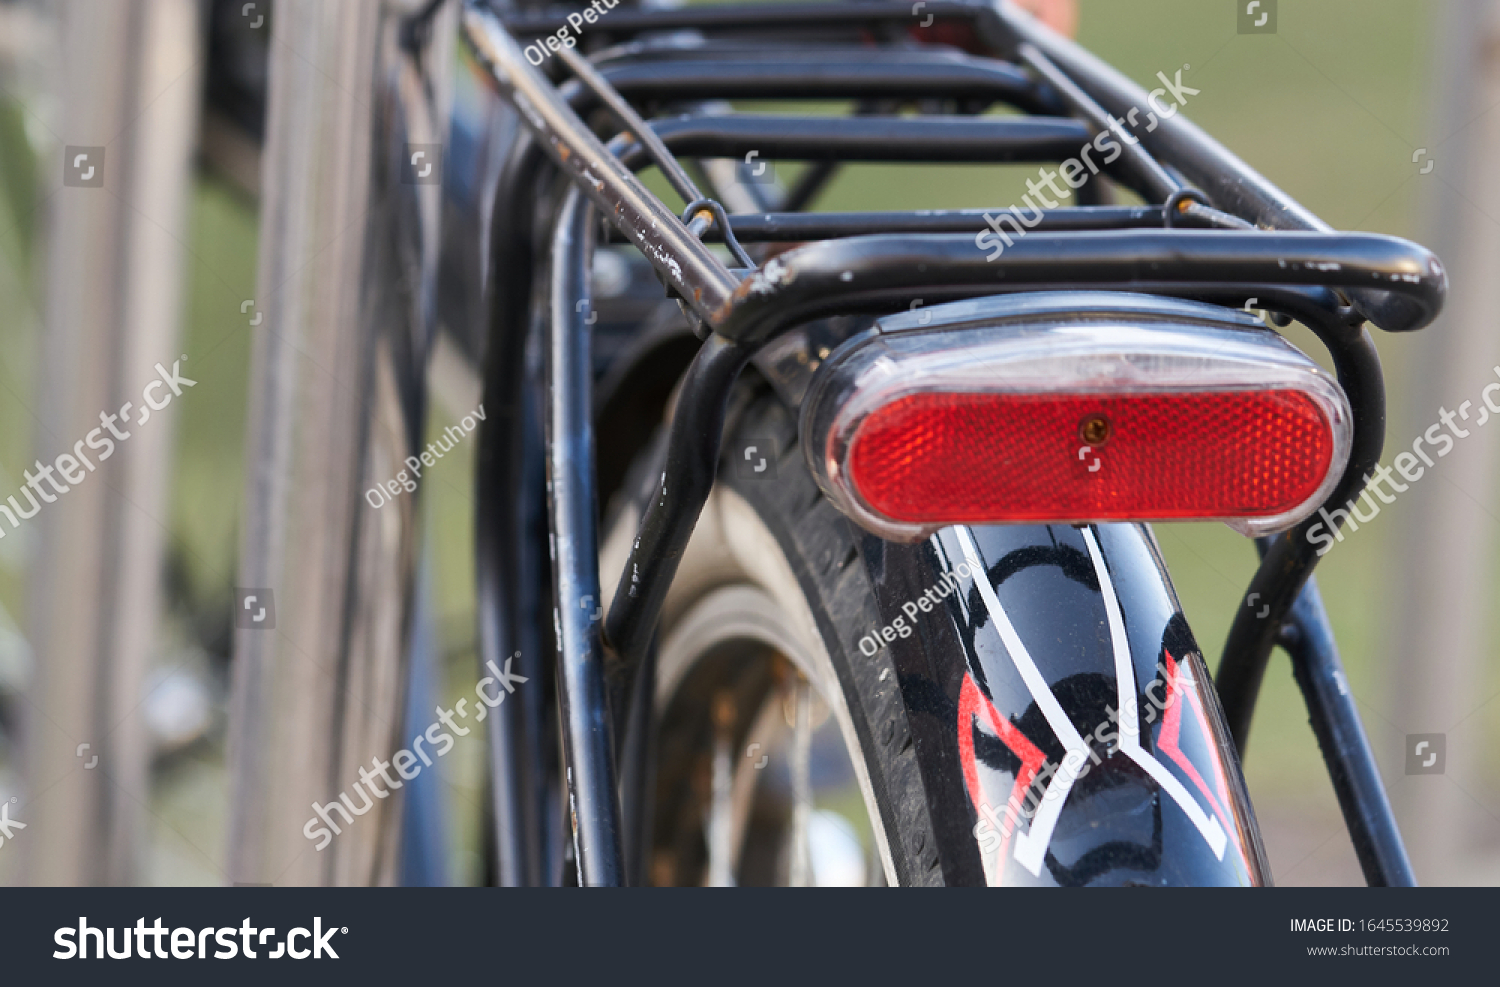 Rear view of bicycle on parking. #1645539892